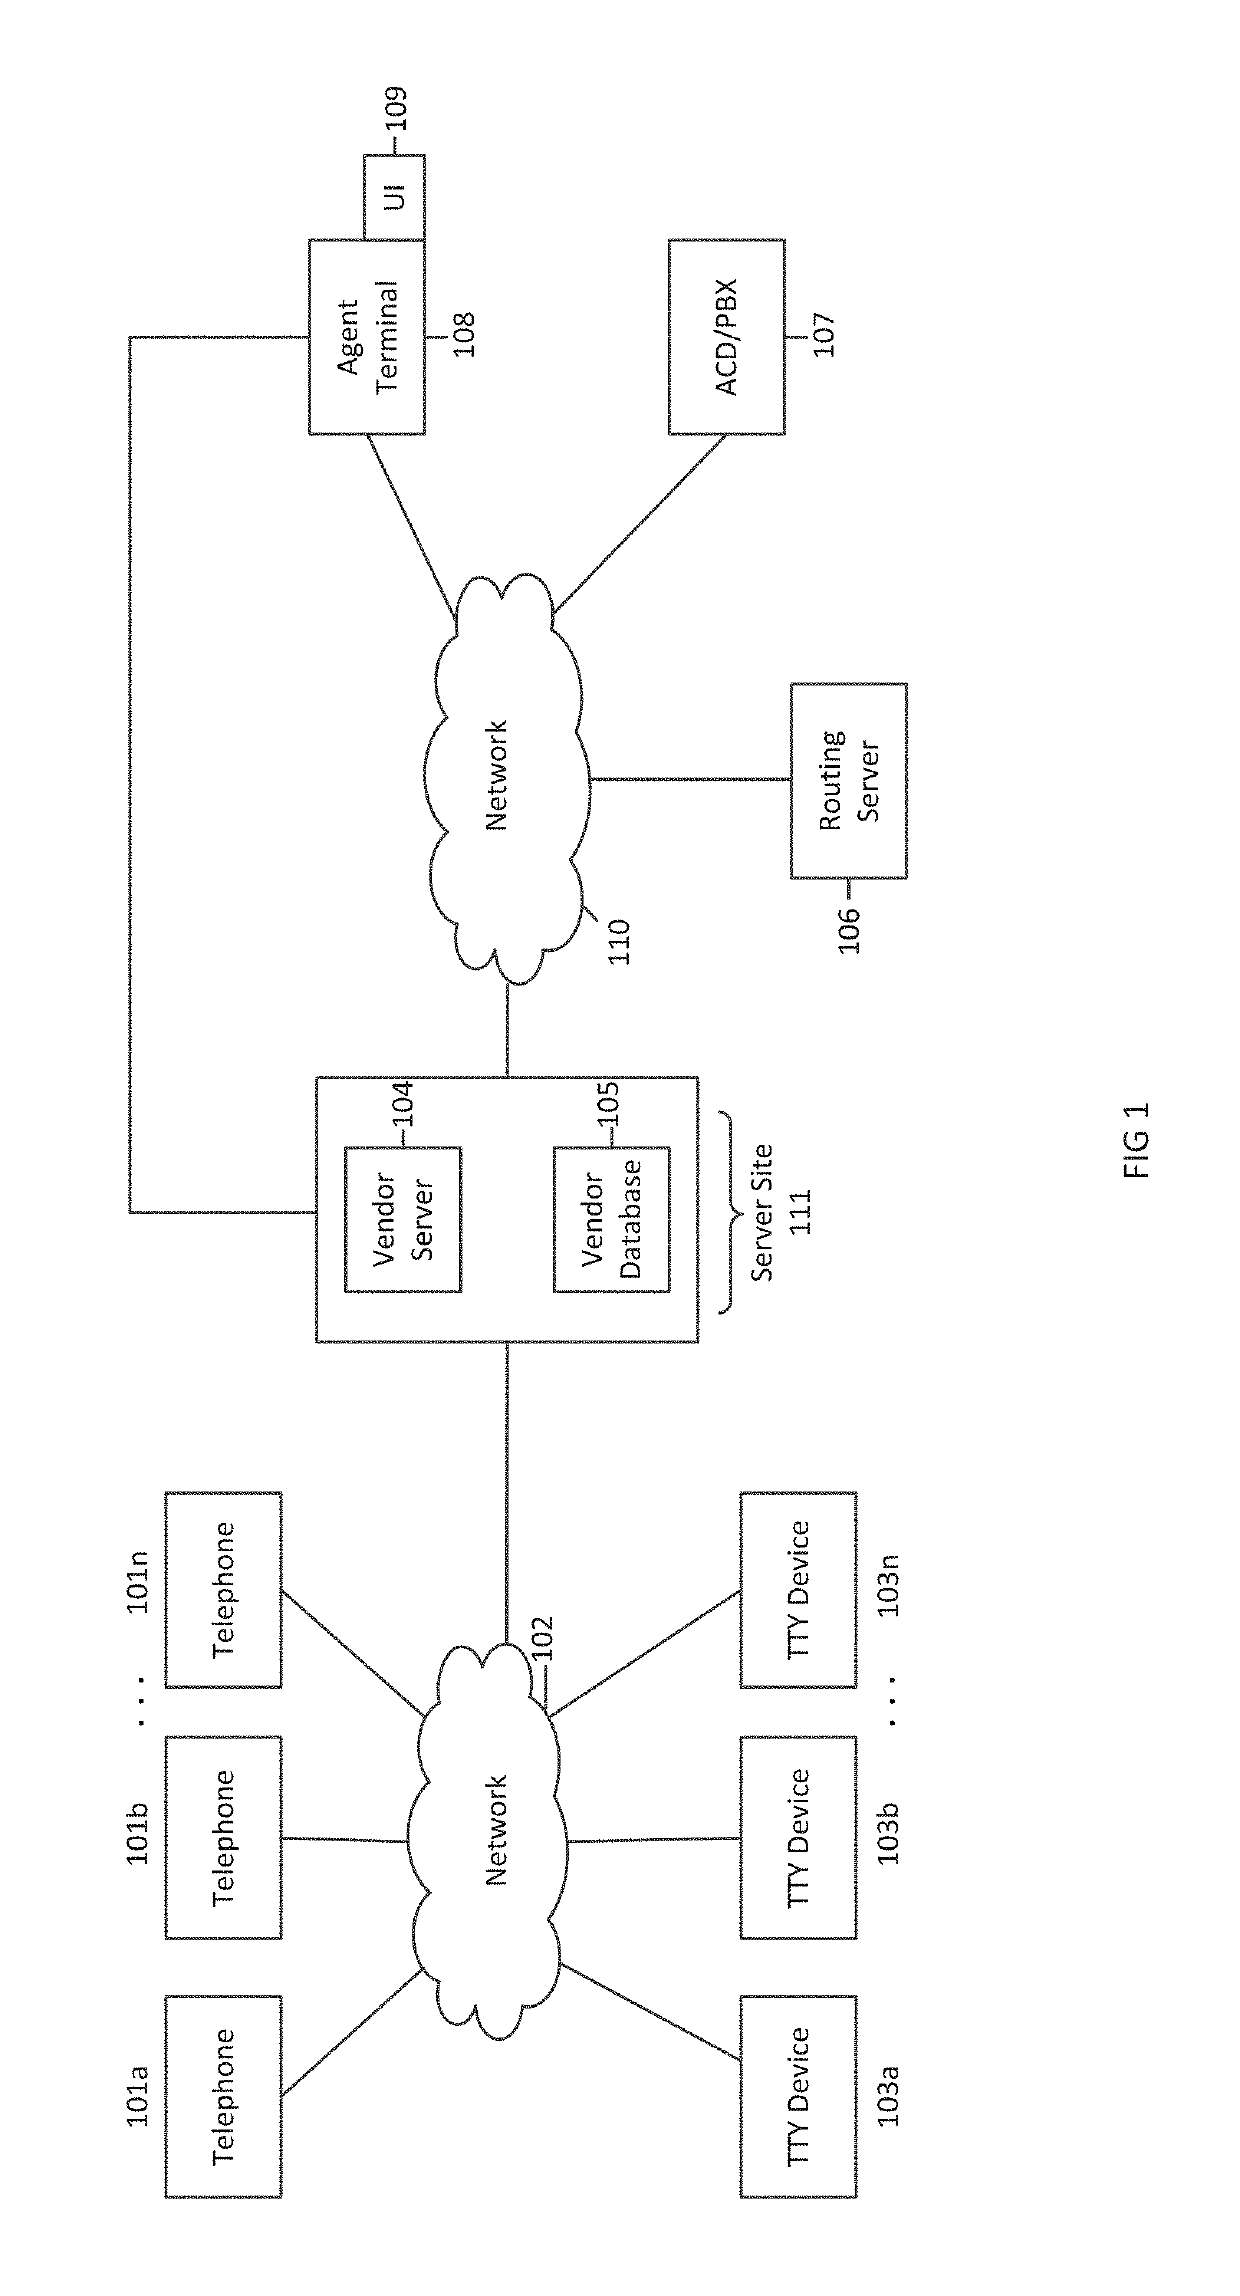 System and method for routing and administering TTY calls